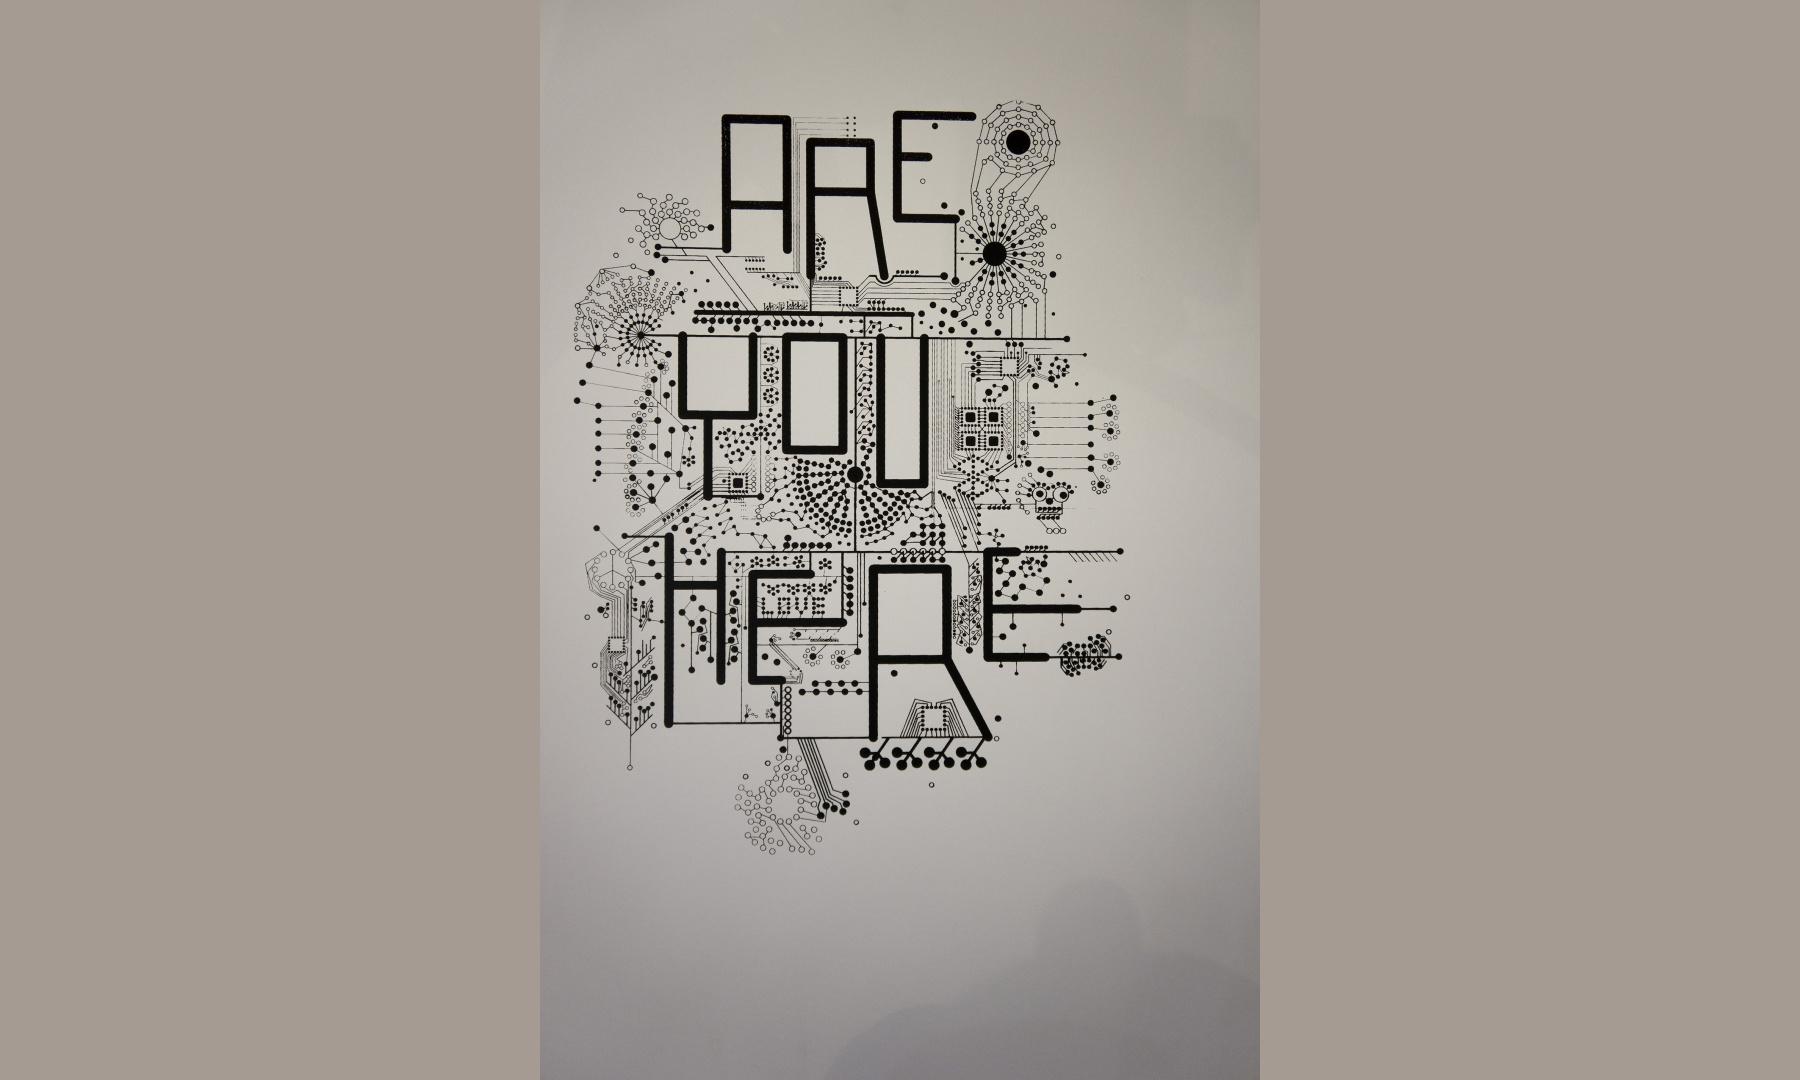 are you here? series by dominik Jais - pcb styled print on paper